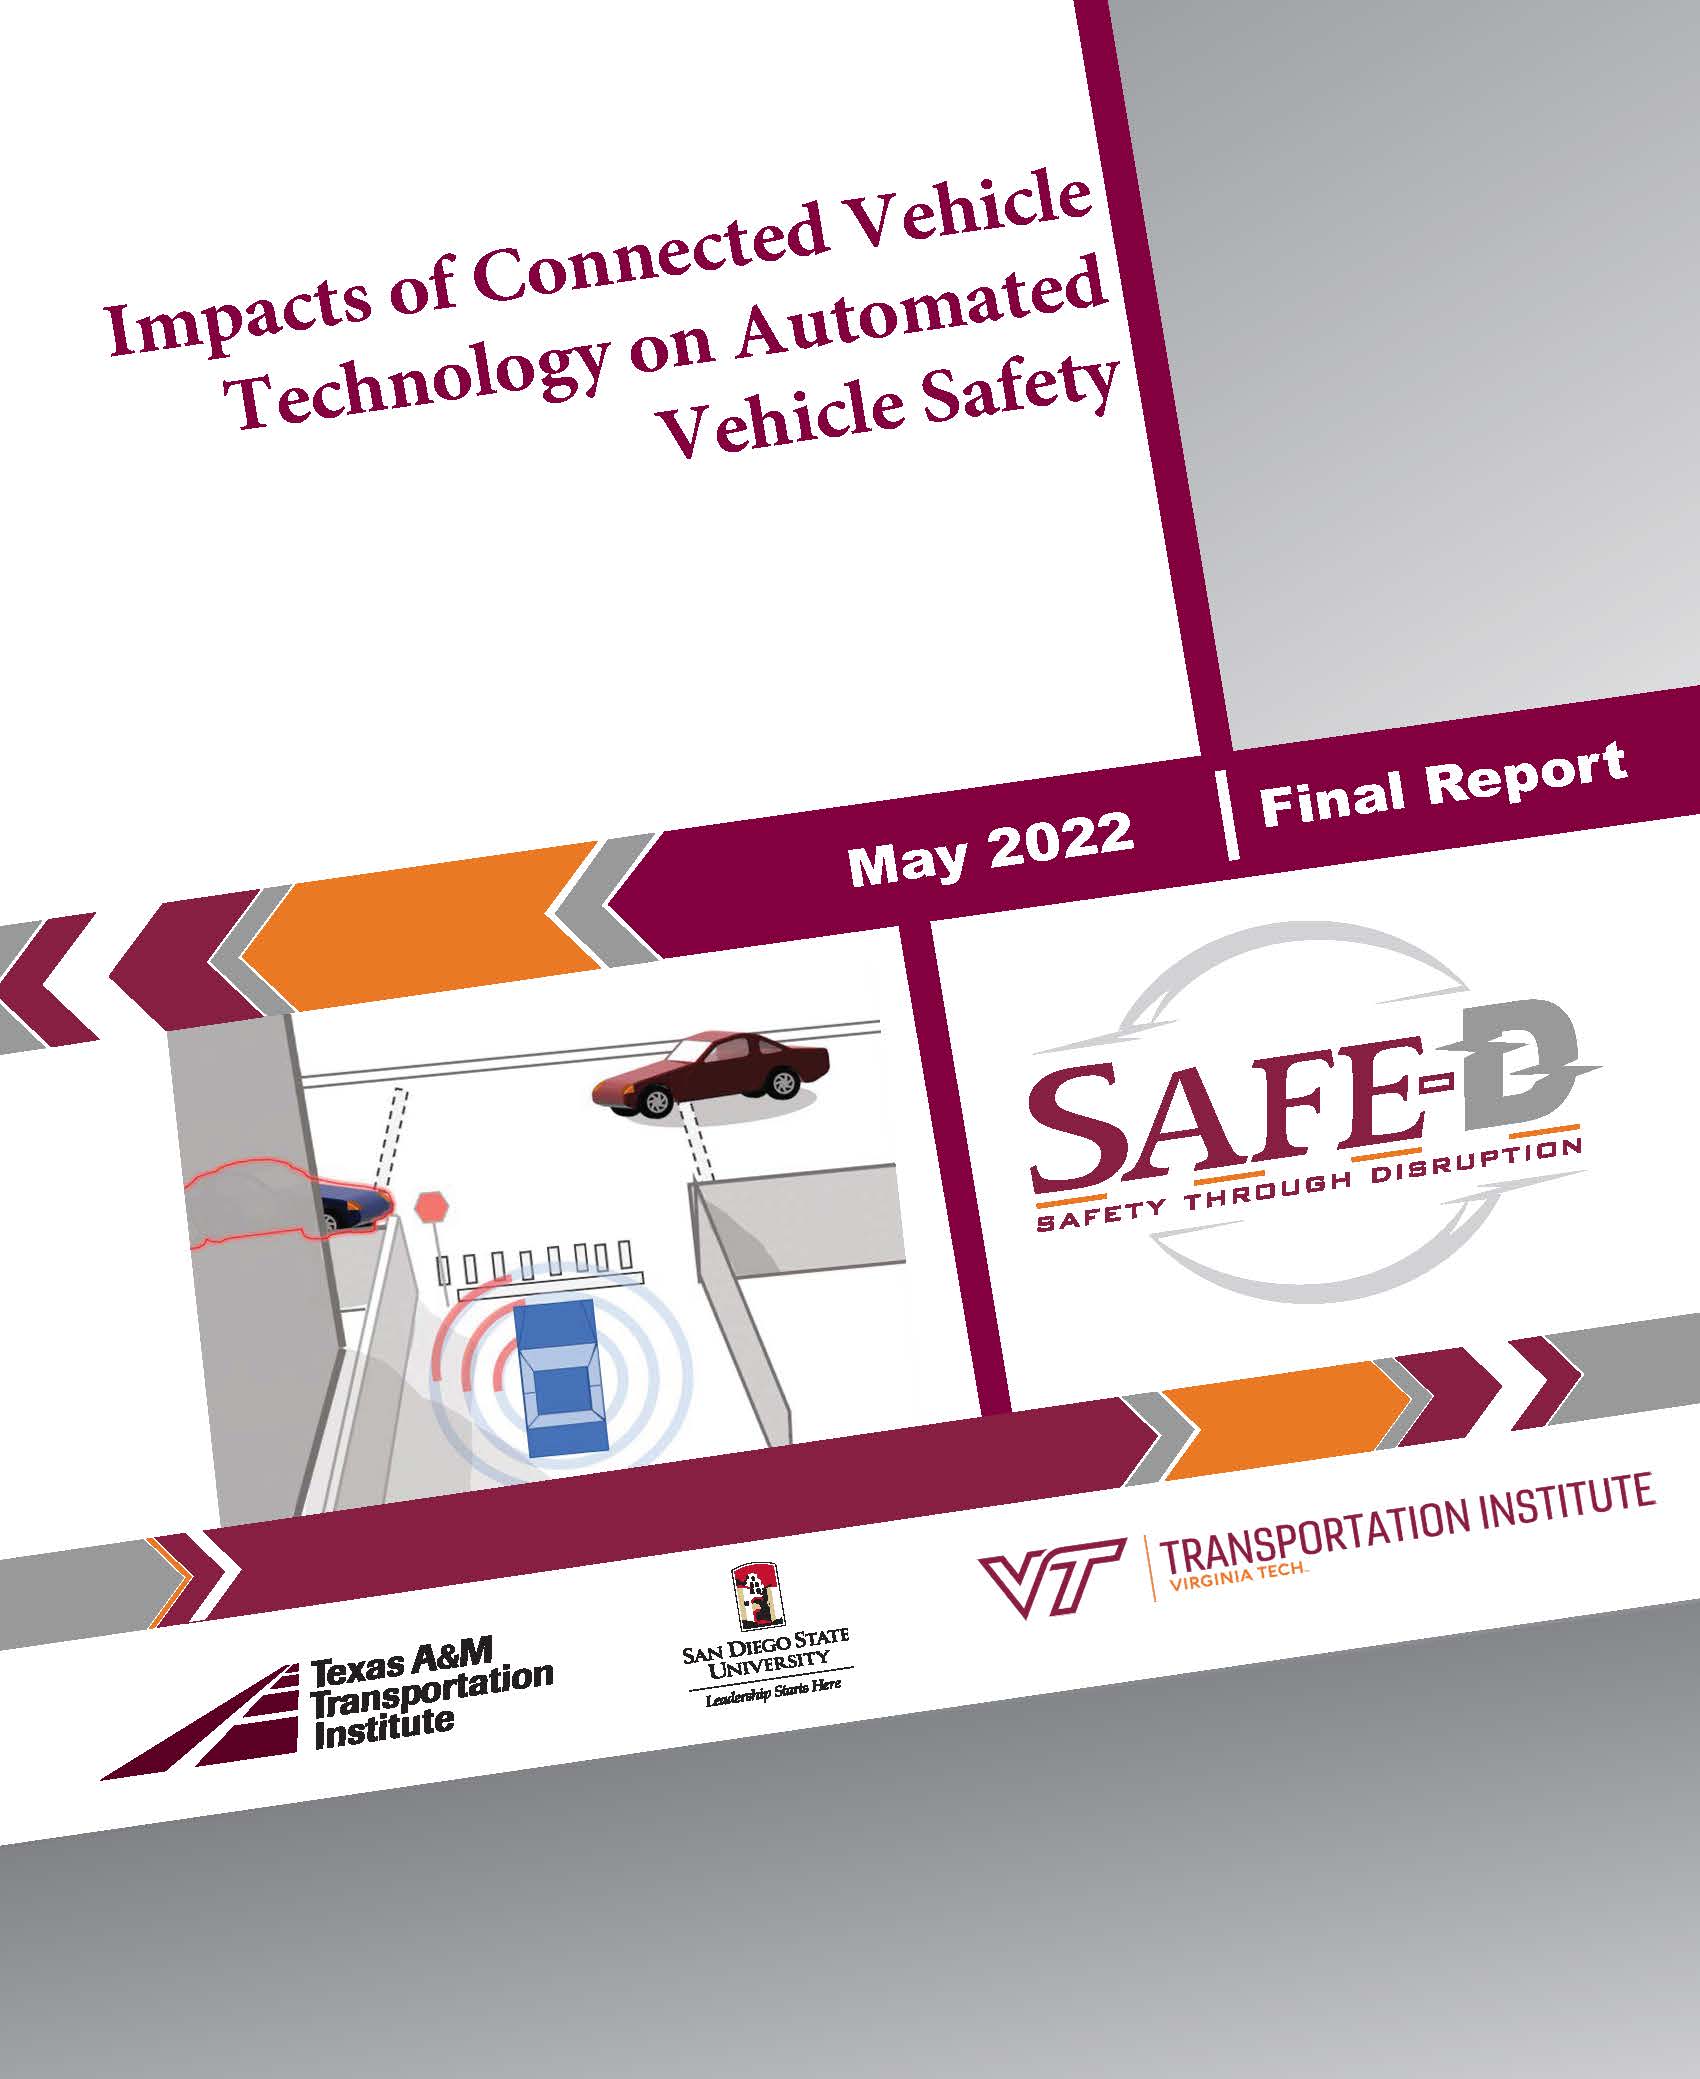 Impacts of Connected Vehicle Technology on Automated Vehicle Safety